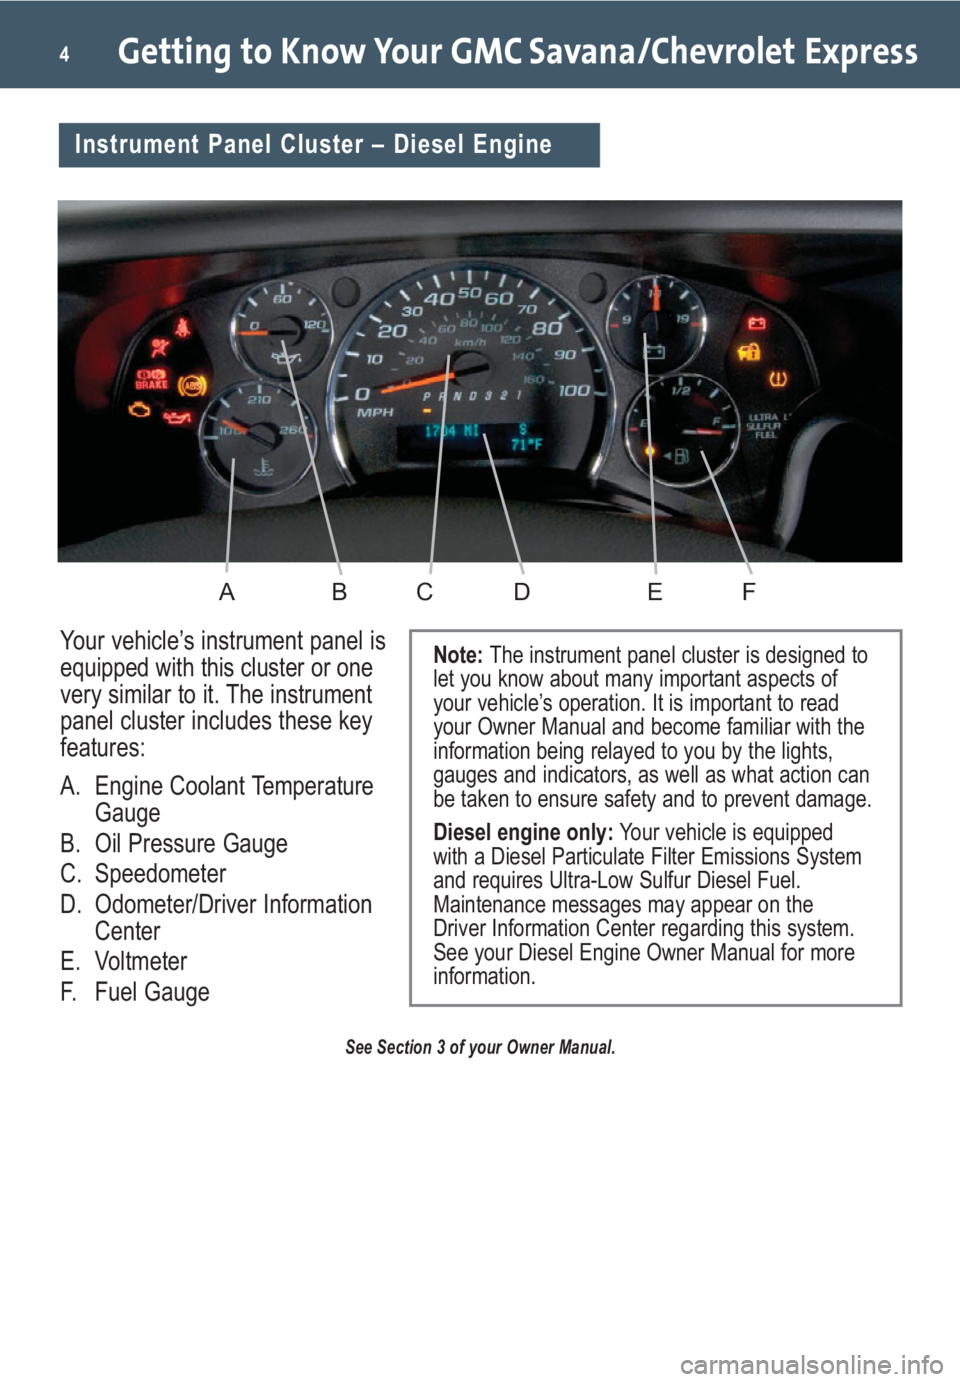 GMC SAVANA 2009  Get To Know Guide Your vehicle’s instrument panel is
equipped with this cluster or one
very similar to it. The instrument
panel cluster includes these key
features:
A. Engine Coolant Temperature
Gauge
B. Oil Pressure